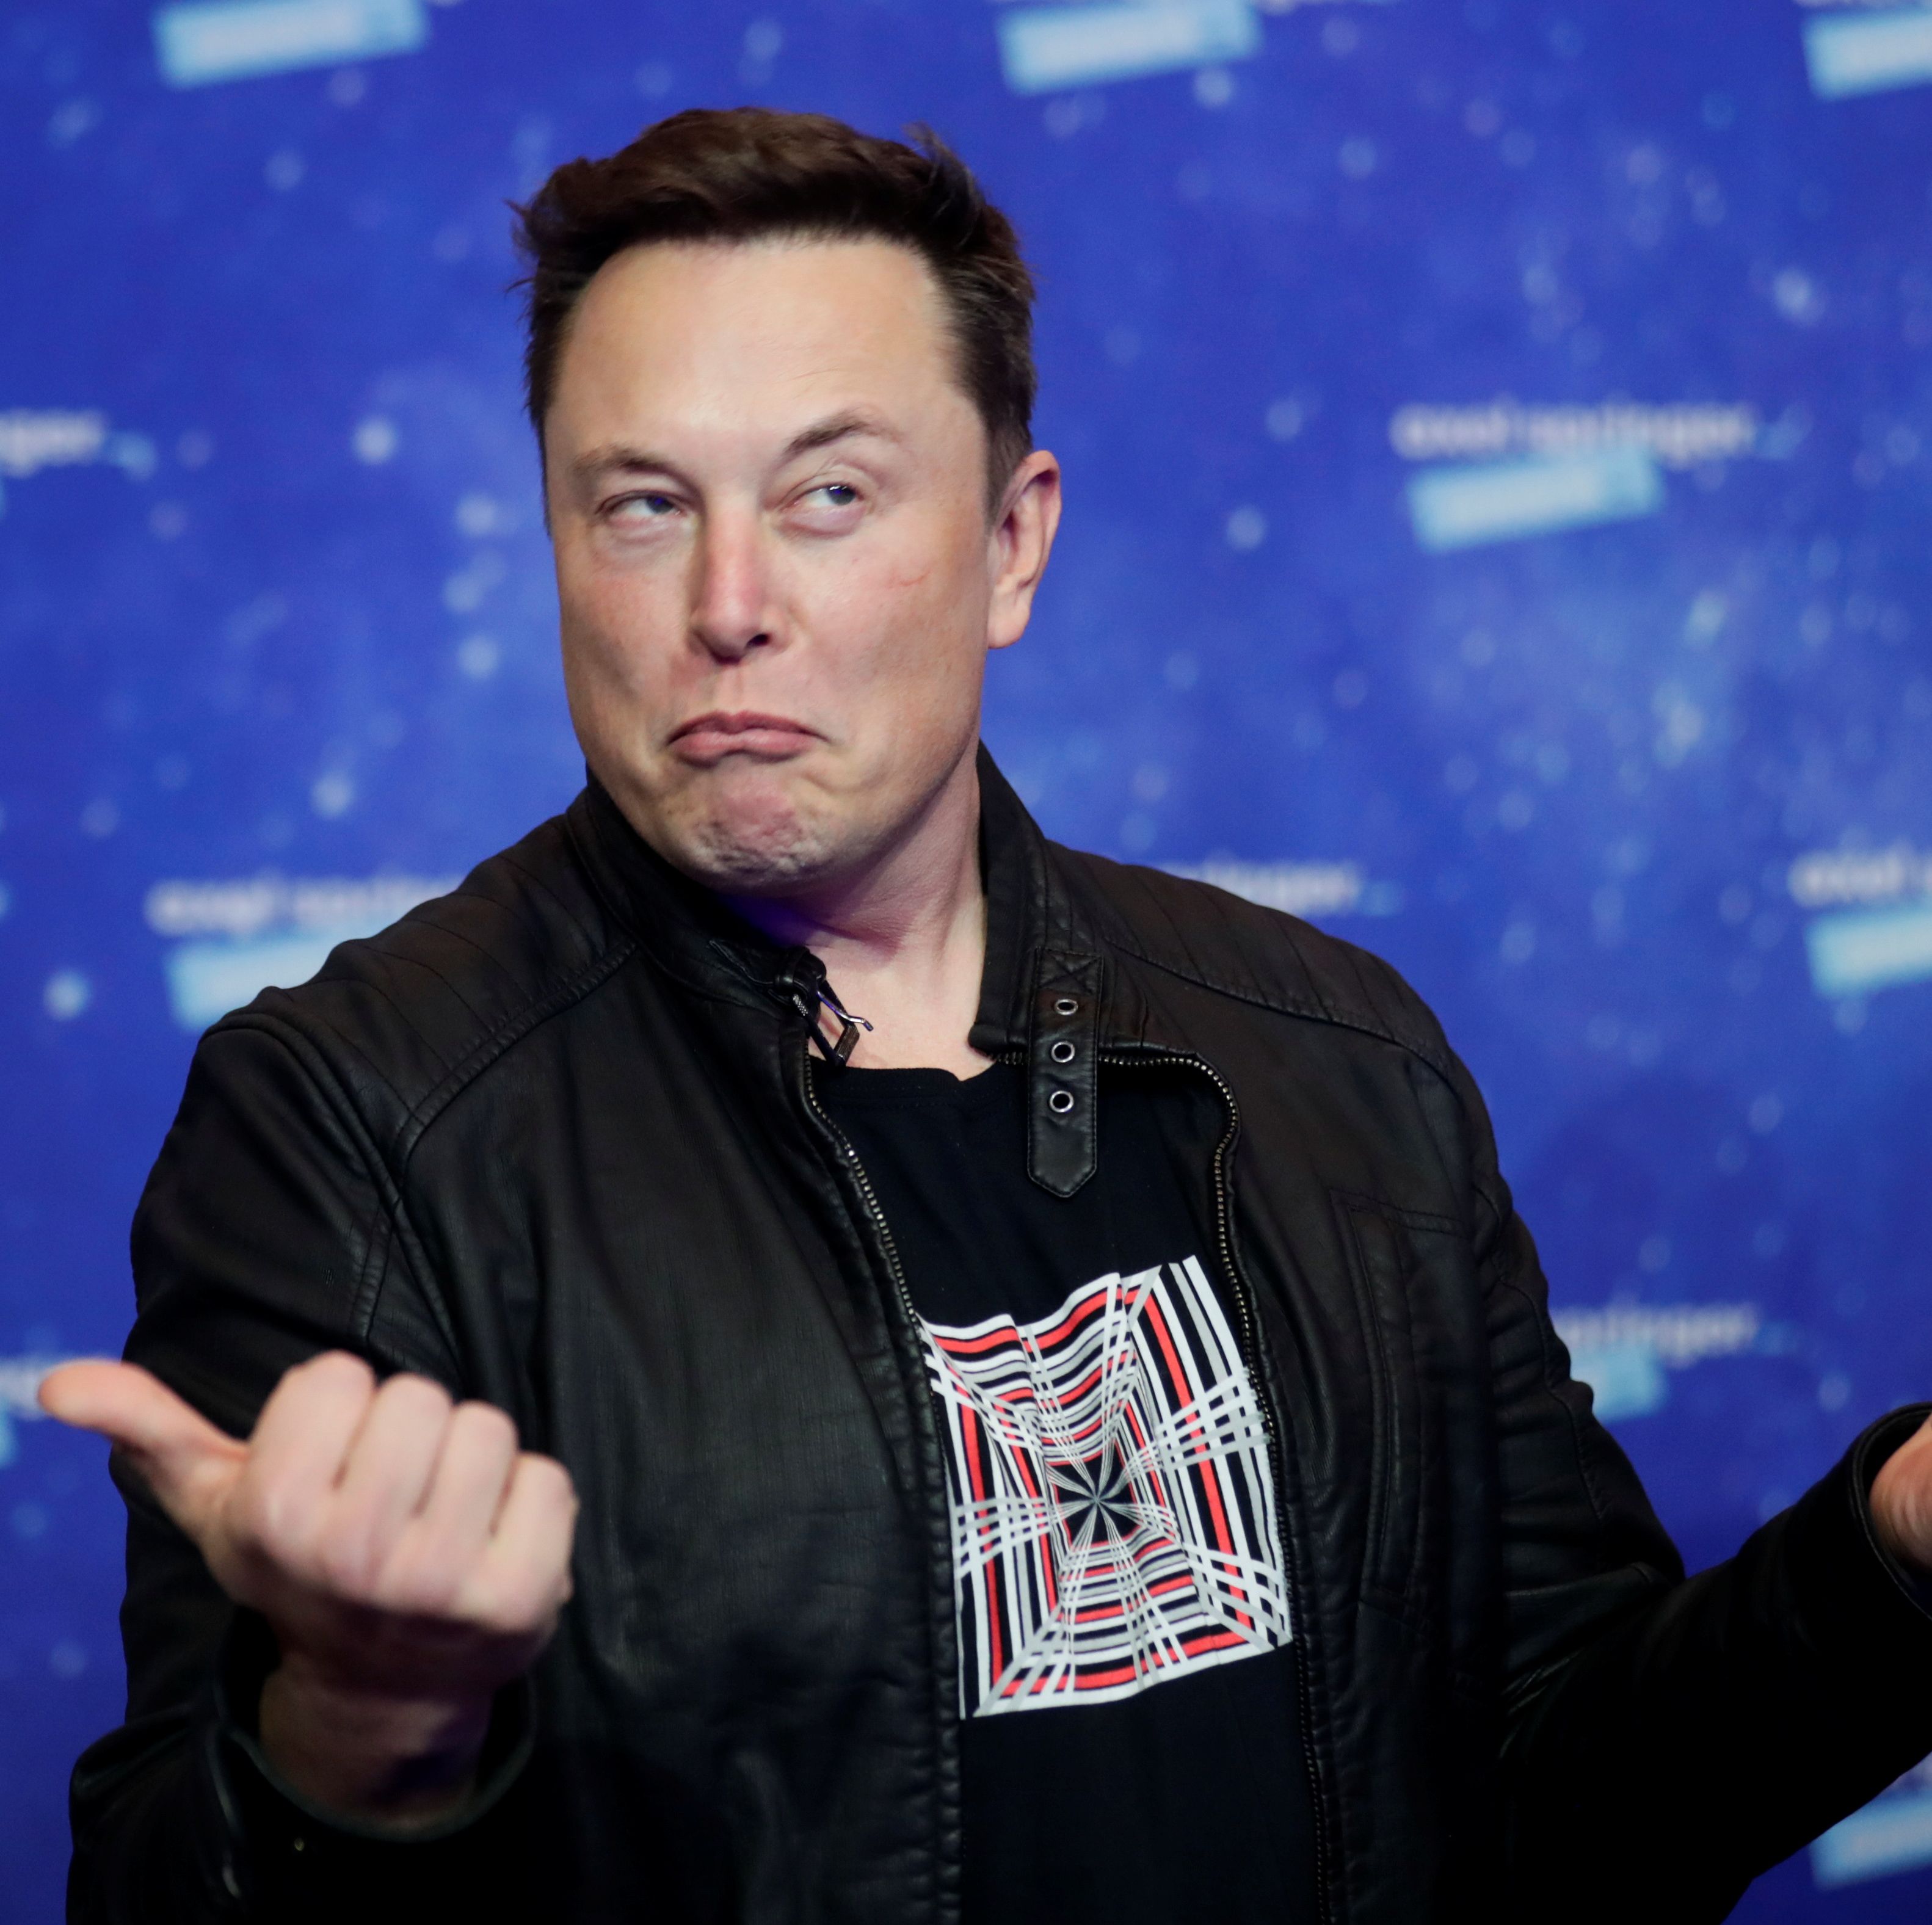 Elon Musk Is Acquiring Twitter. Here Are 5 Ways He Wants to Change It